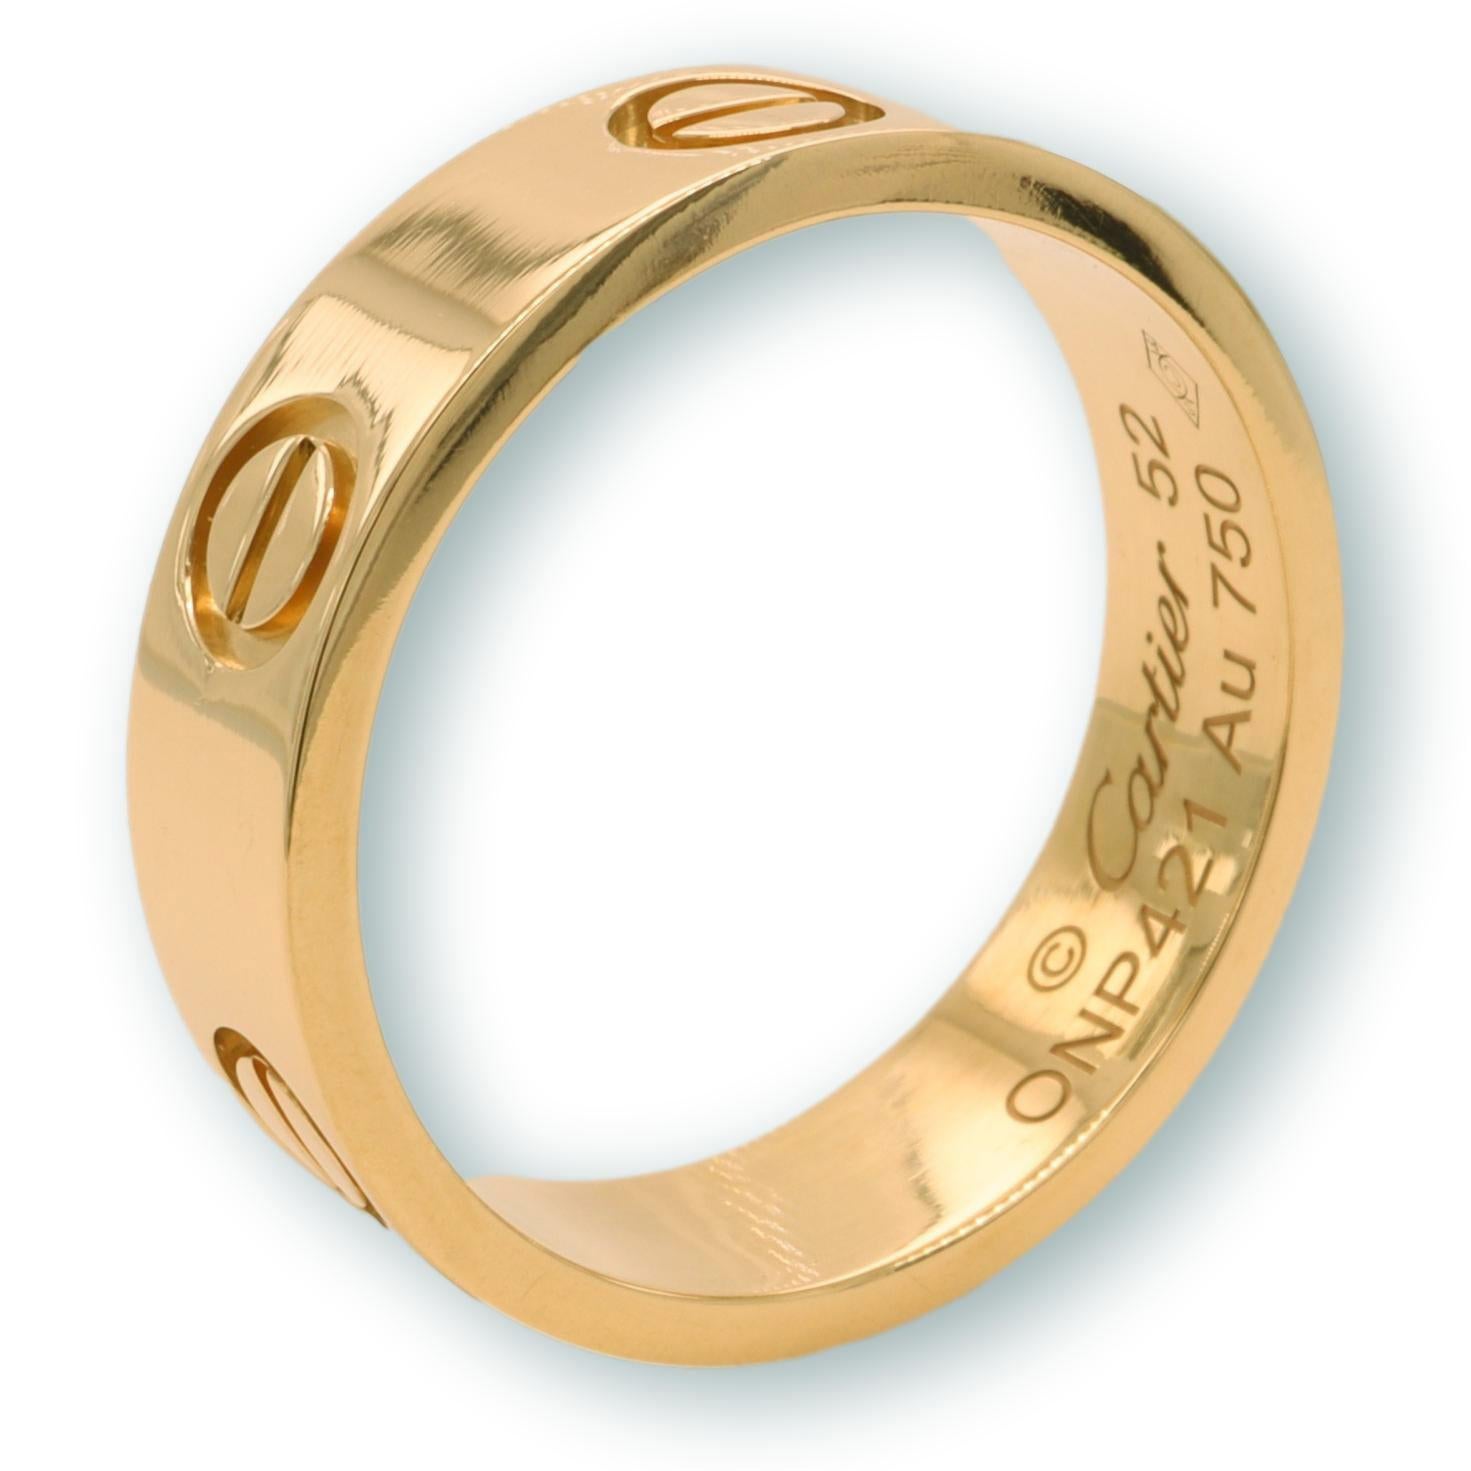 Cartier ring from the LOVE collection finely crafted in 18 karat yellow gold with screw motifs. Measures 5.5 mm wide. Includes Certificate of Authenticity. Ring is fully hallmarked with logo , serial numbers, size and metal content.

Ring